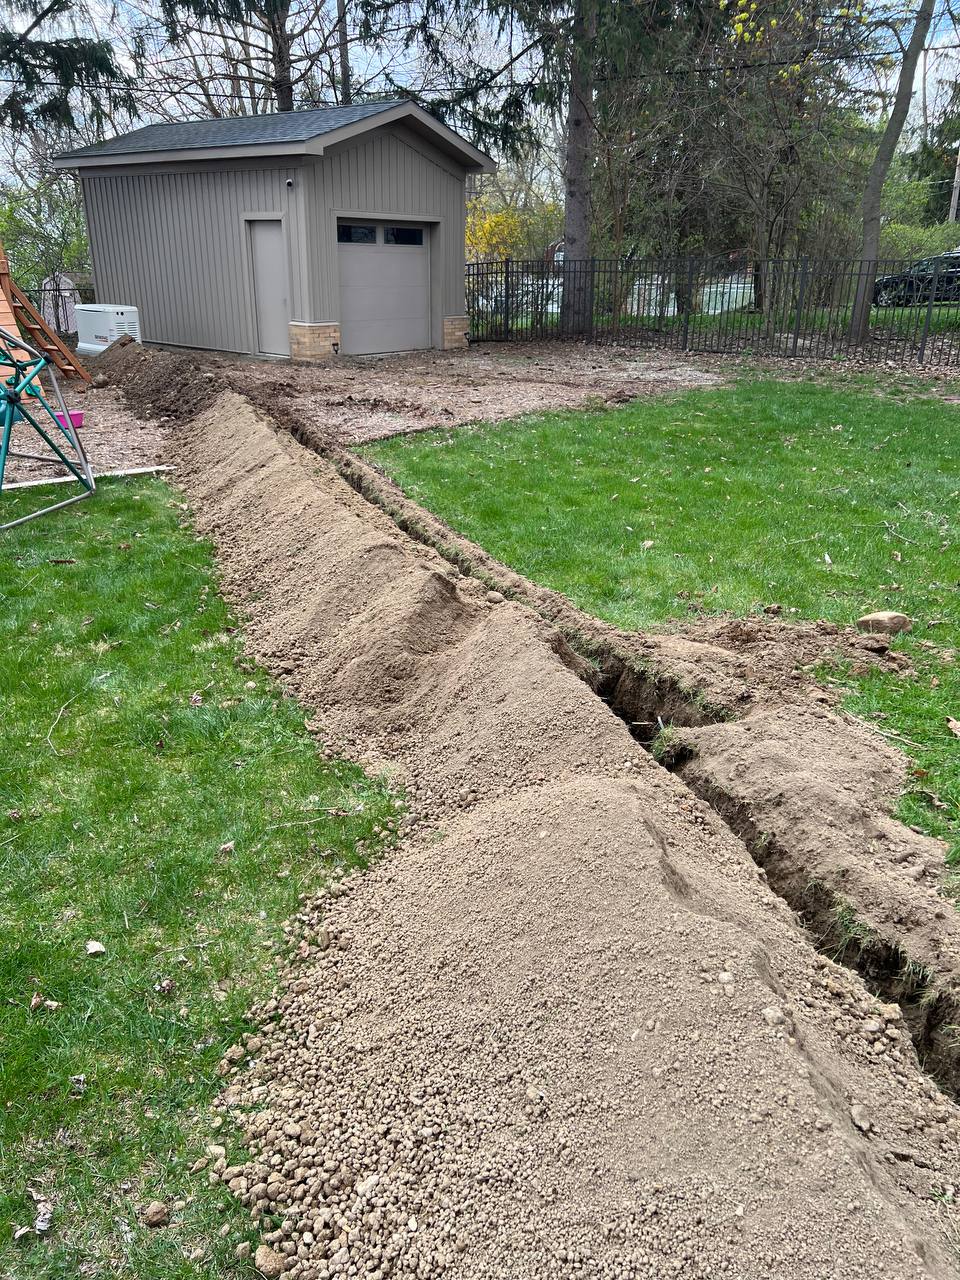 Trench in the back yard